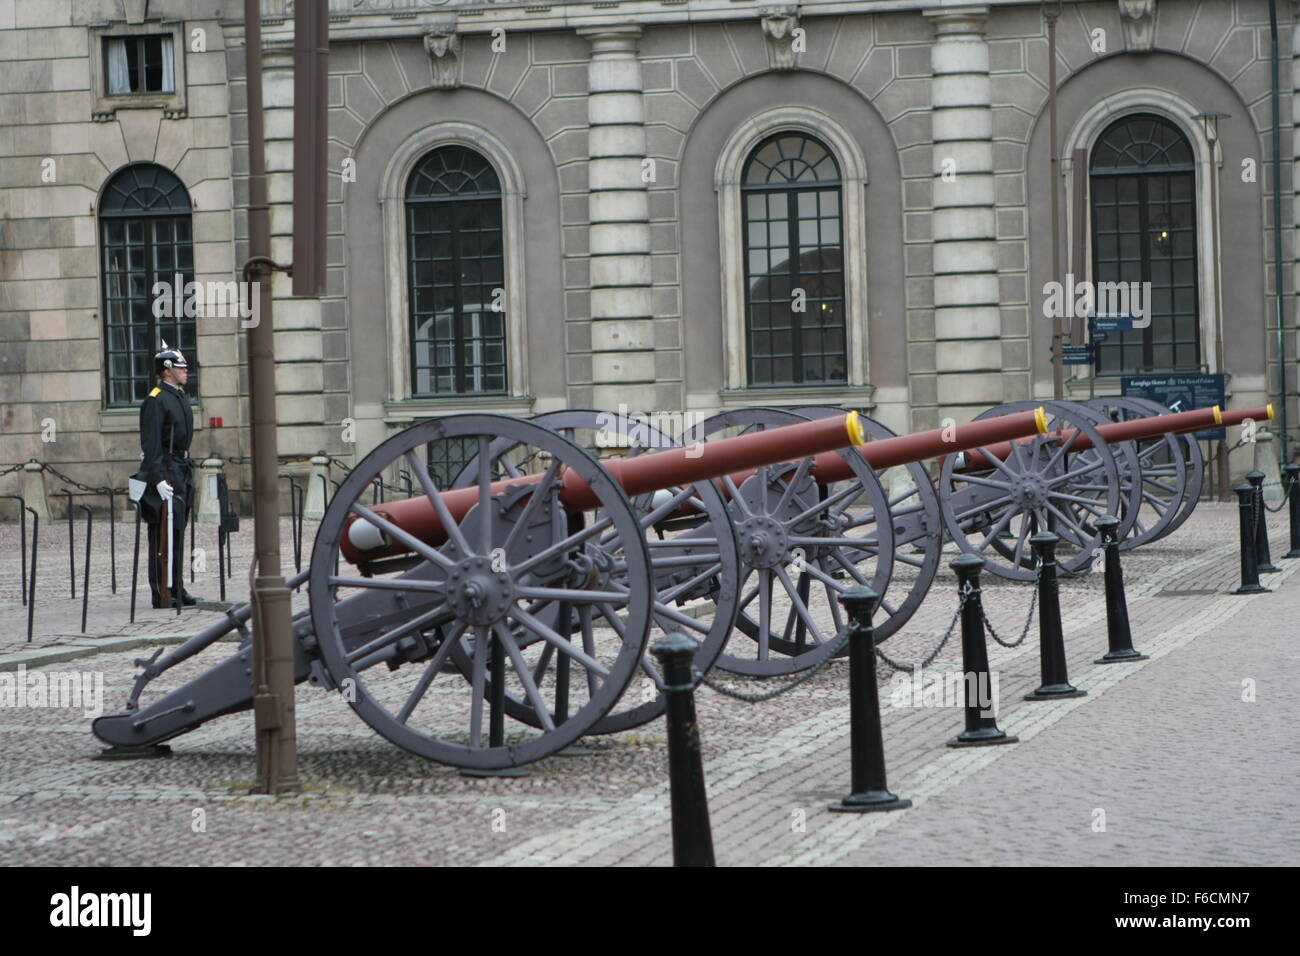 Ceremonial cannons at the palace in Stockhom Sweden Stock Photo